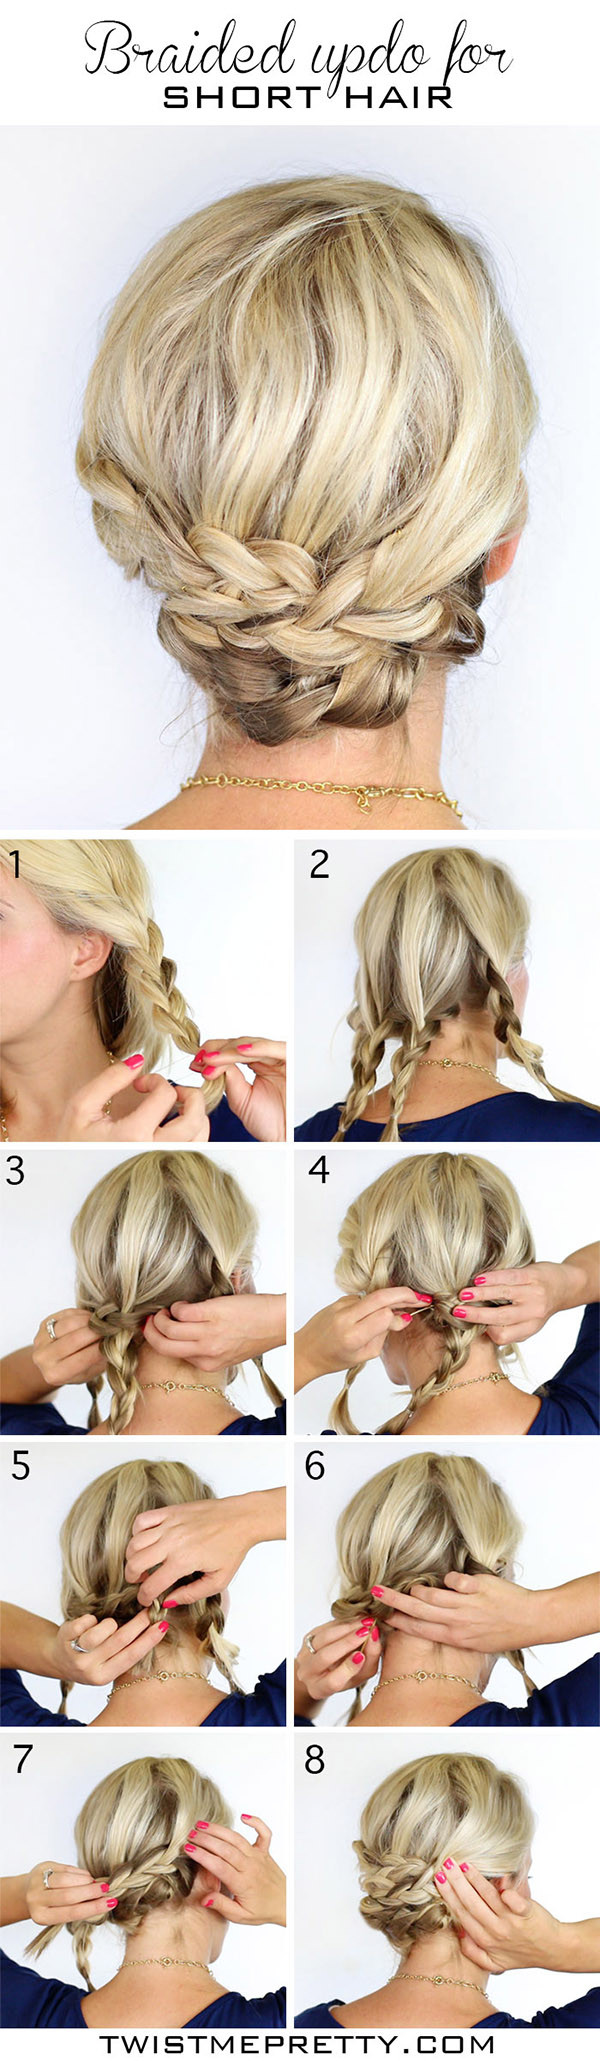 DIY Up Do Hairstyles
 20 DIY Wedding Hairstyles With Tutorials To Try Your Own